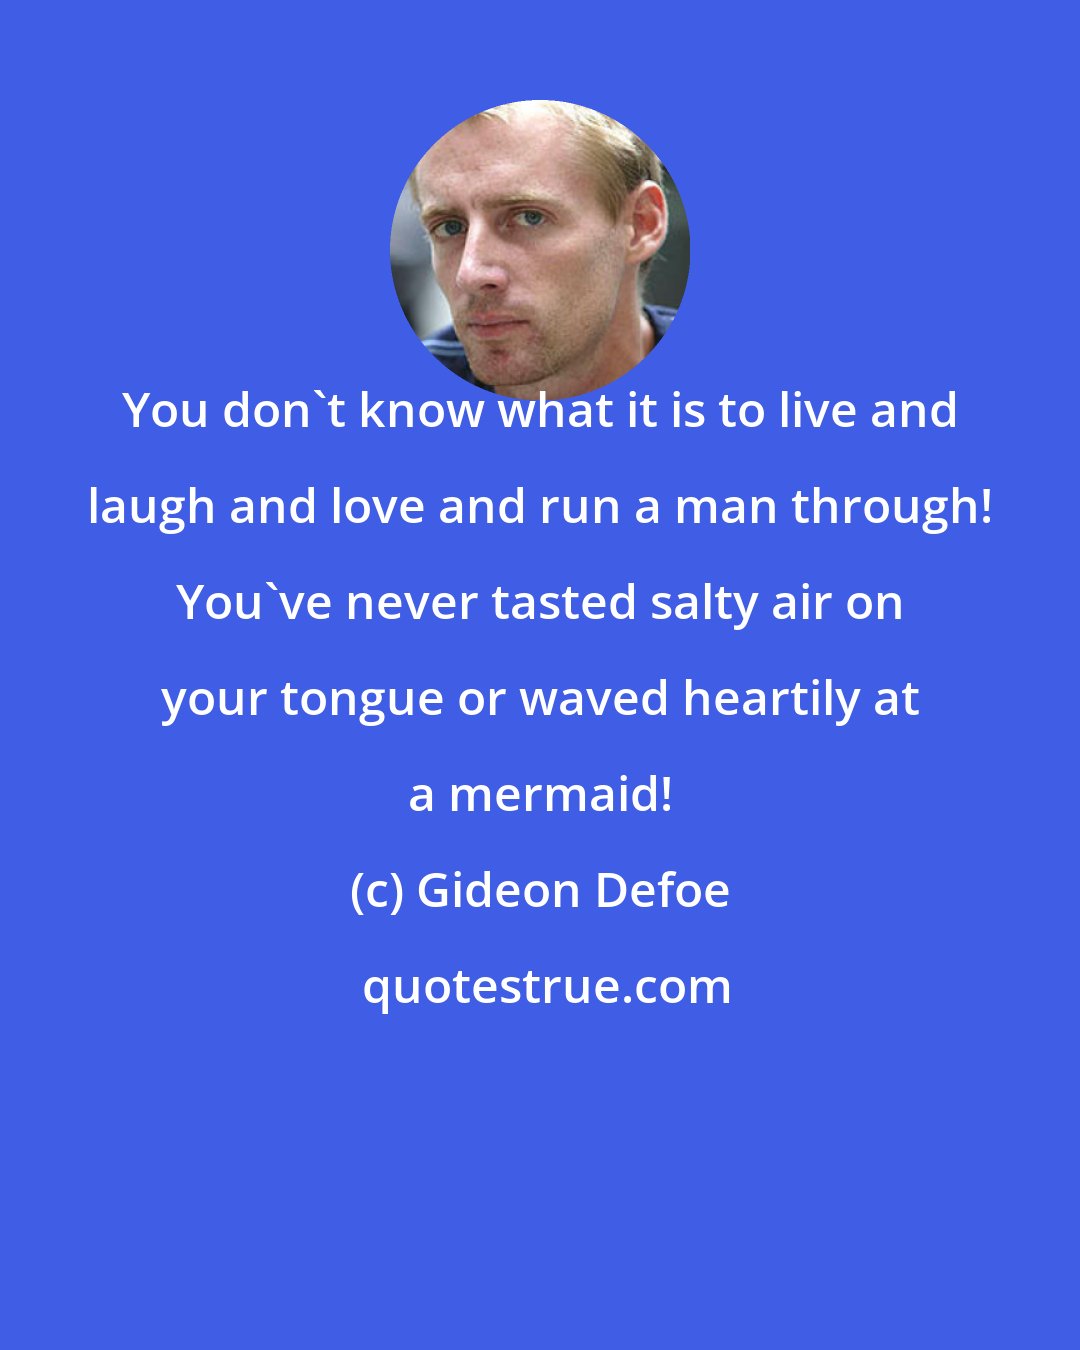 Gideon Defoe: You don't know what it is to live and laugh and love and run a man through! You've never tasted salty air on your tongue or waved heartily at a mermaid!